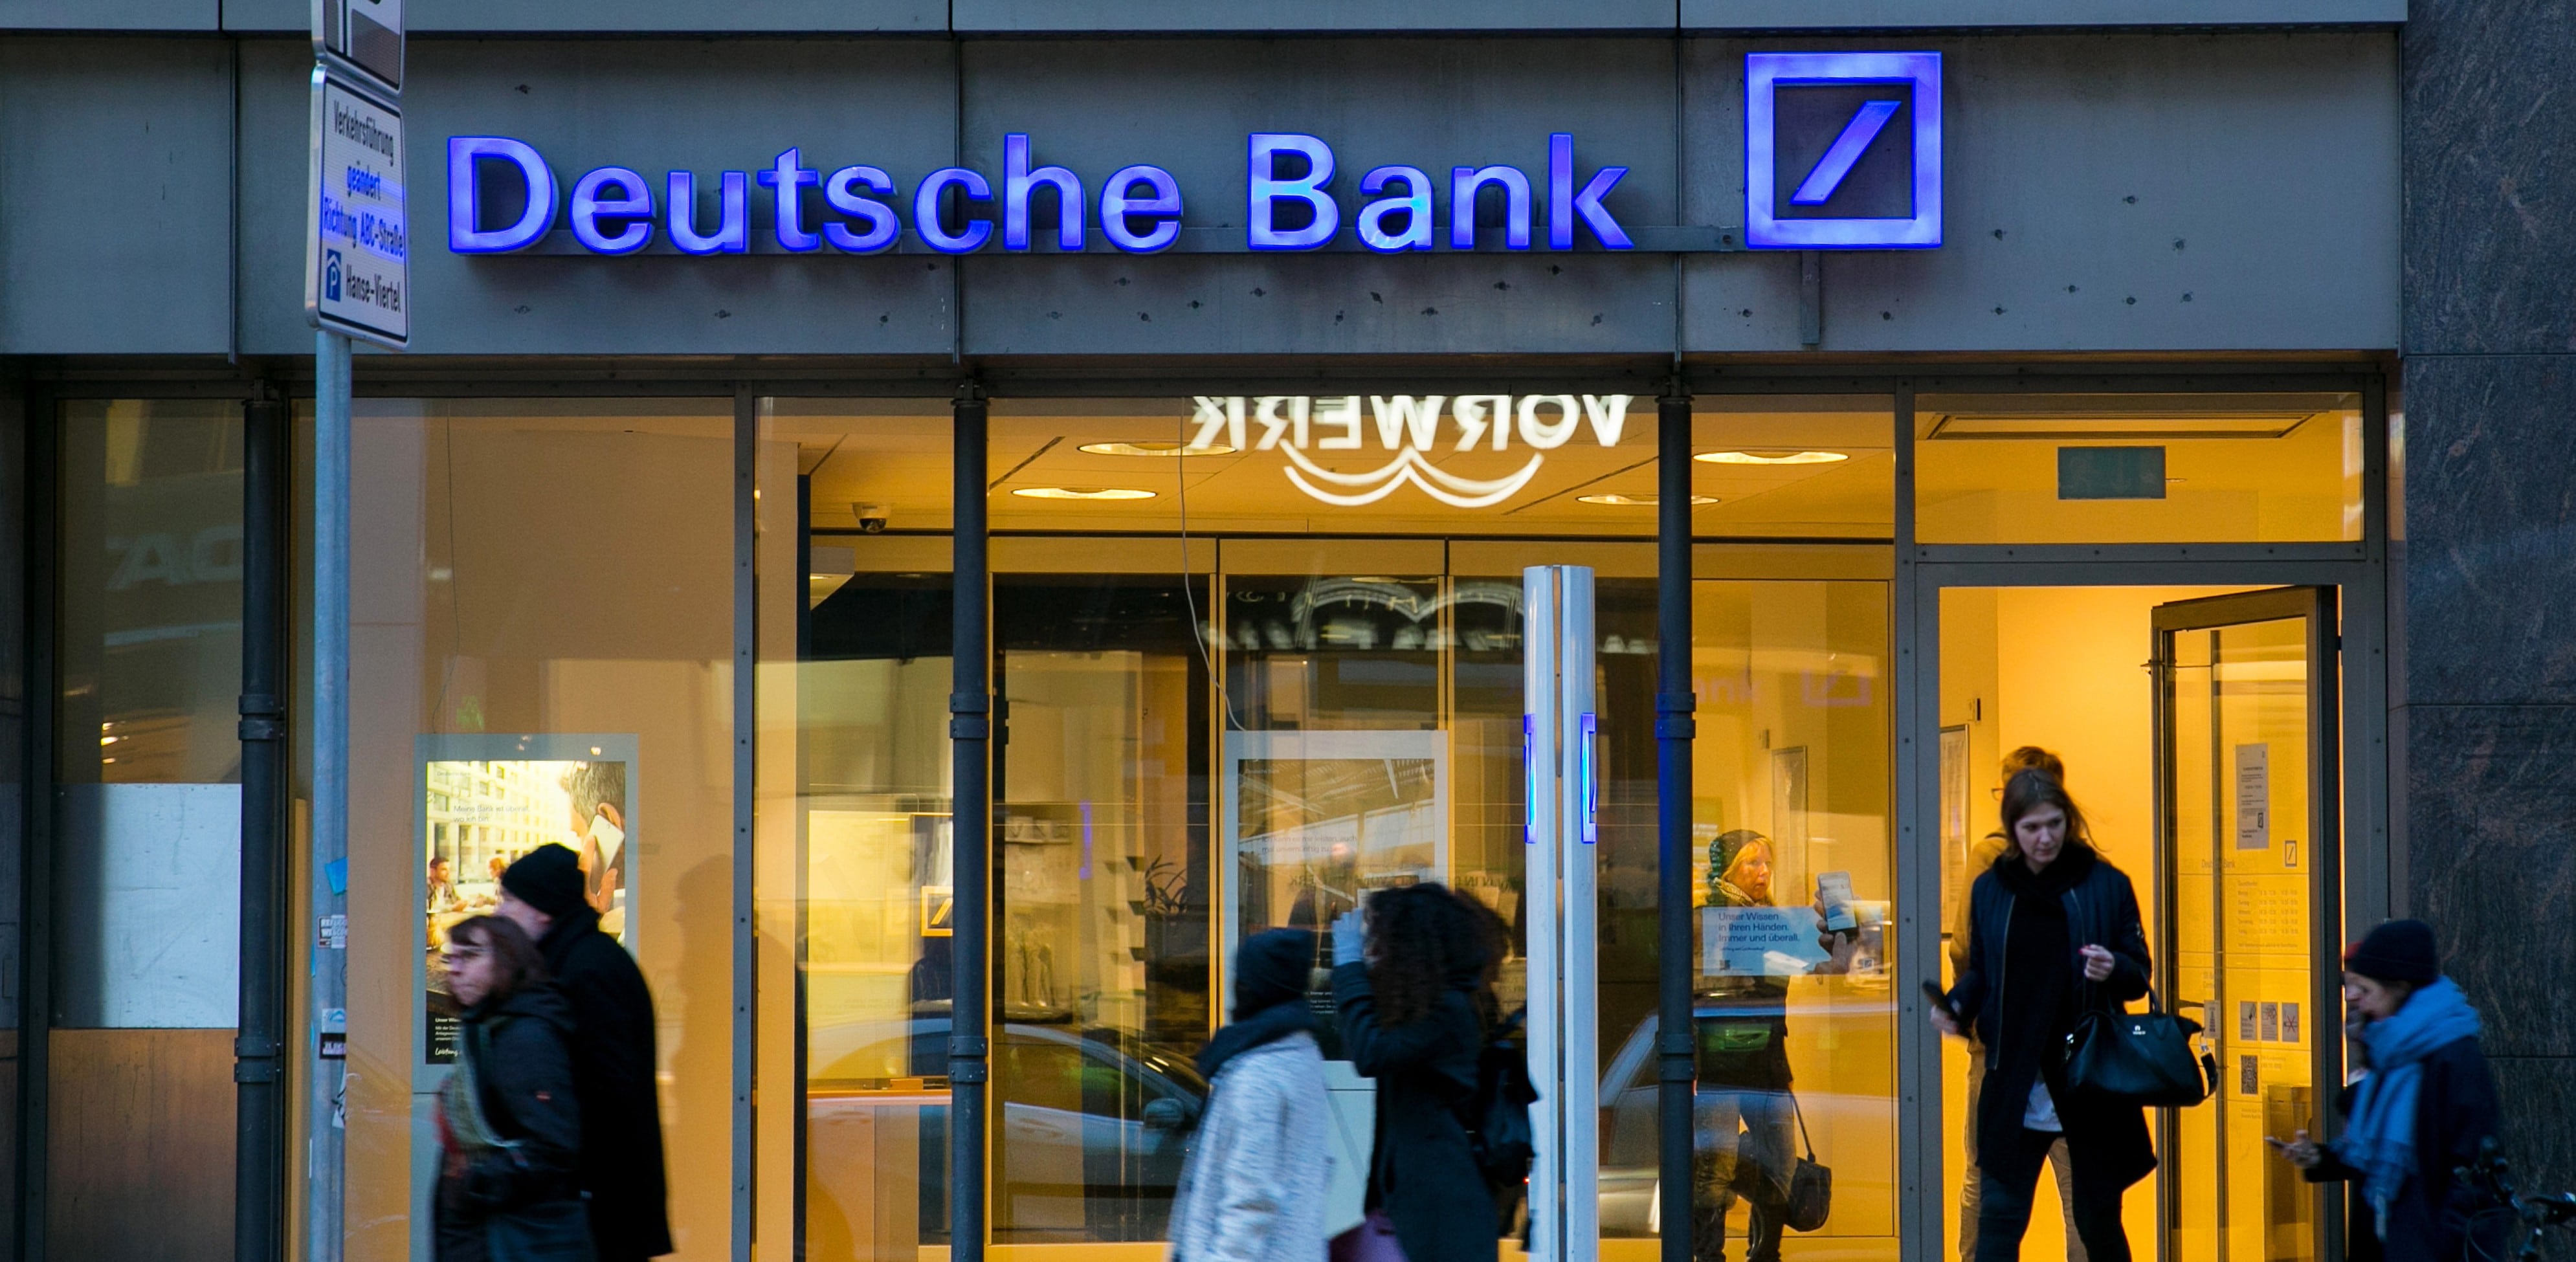 Why Germany Won't Save Deutsche Bank (But Might Have To)